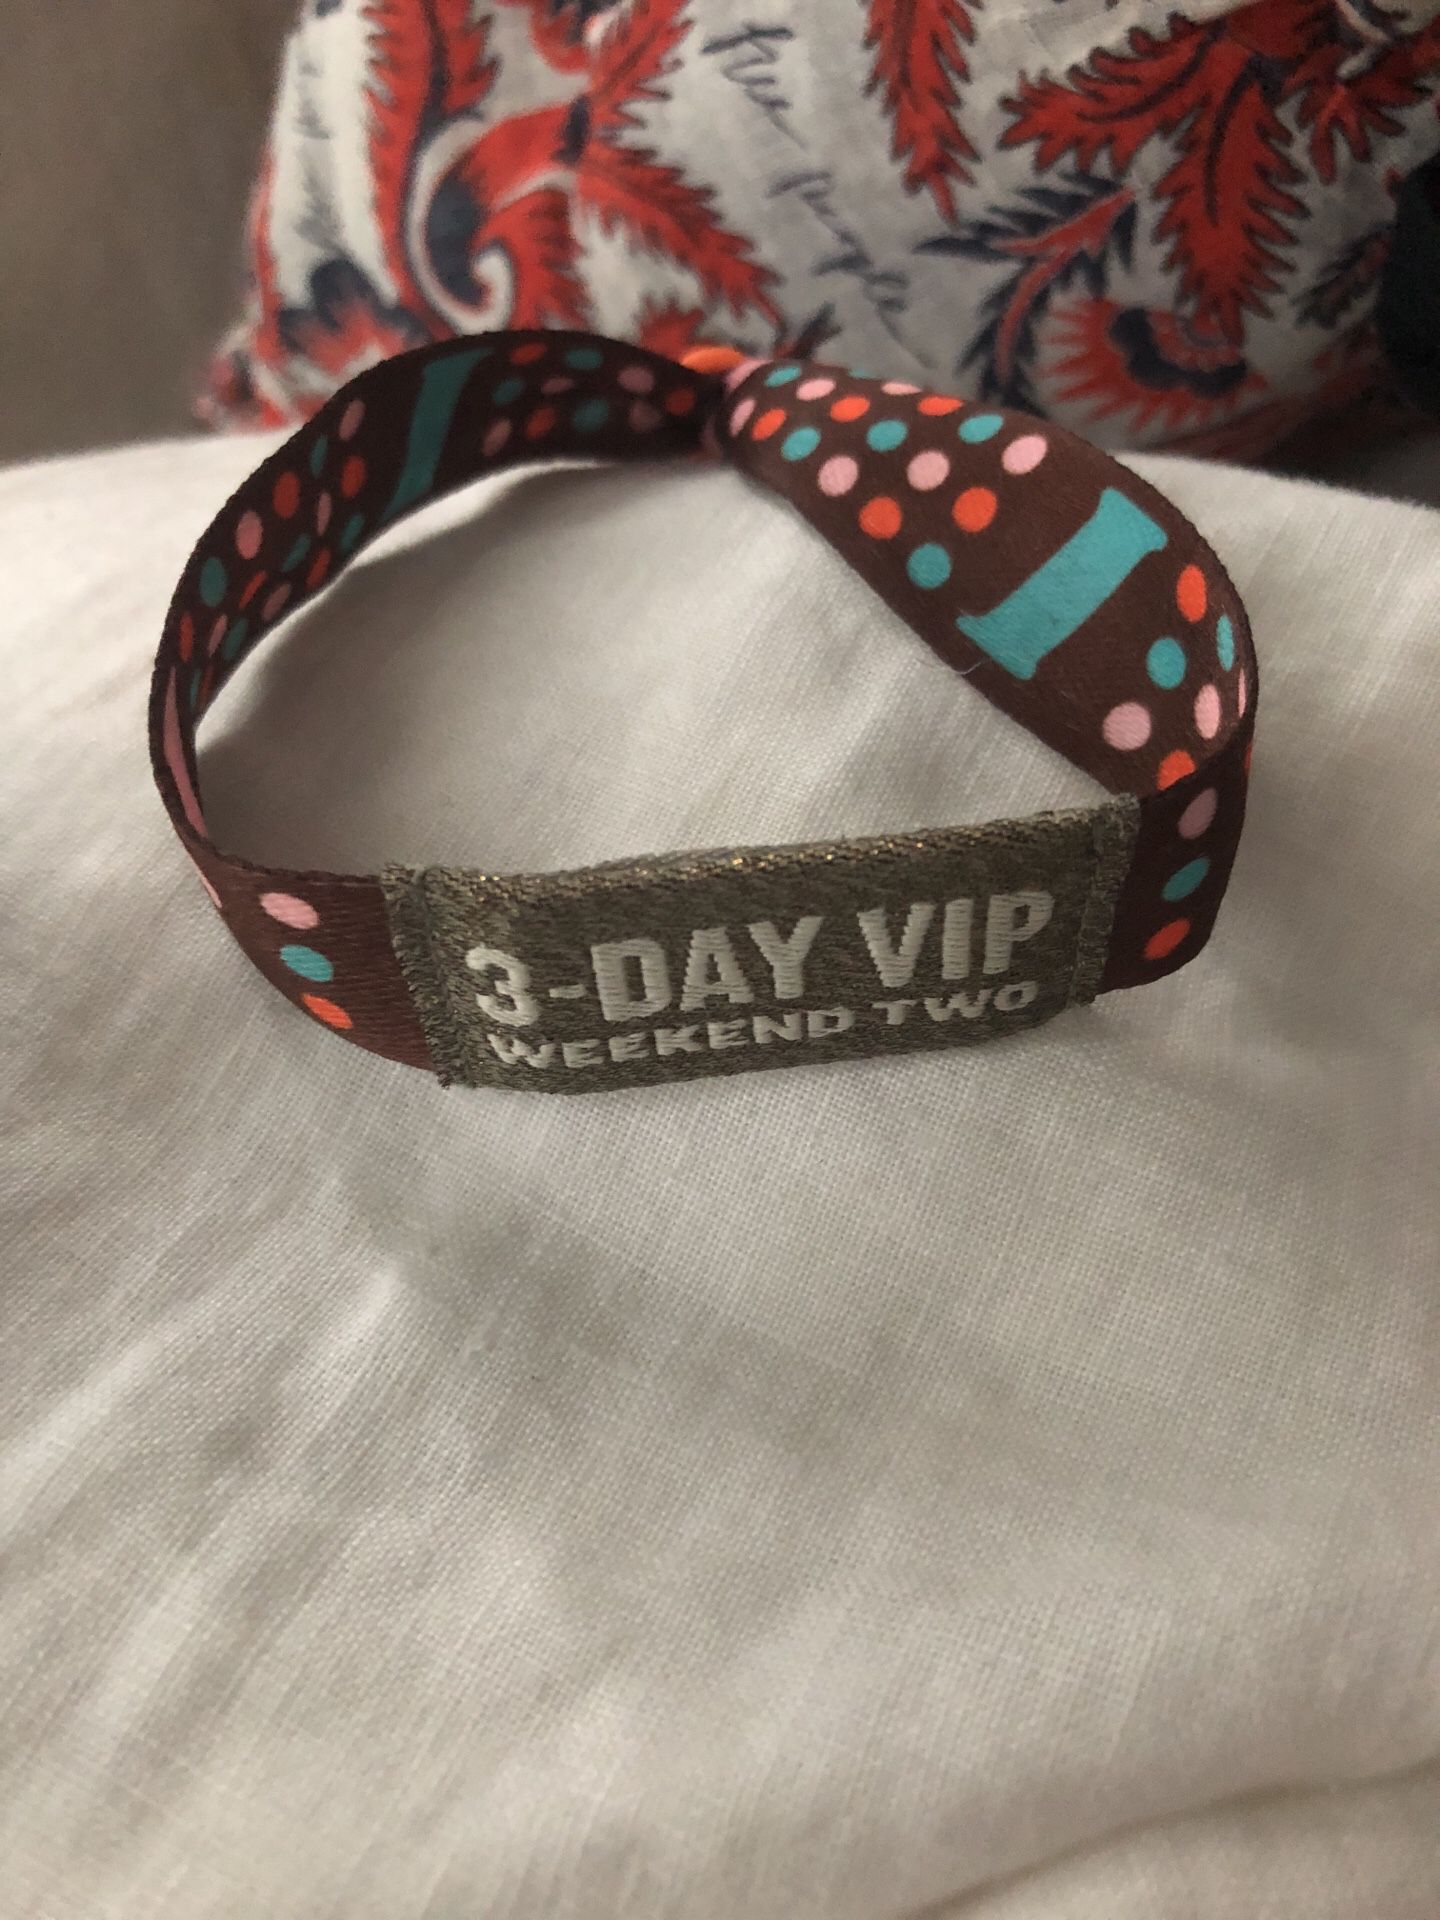 Two Weekend VIP ACL wristbands